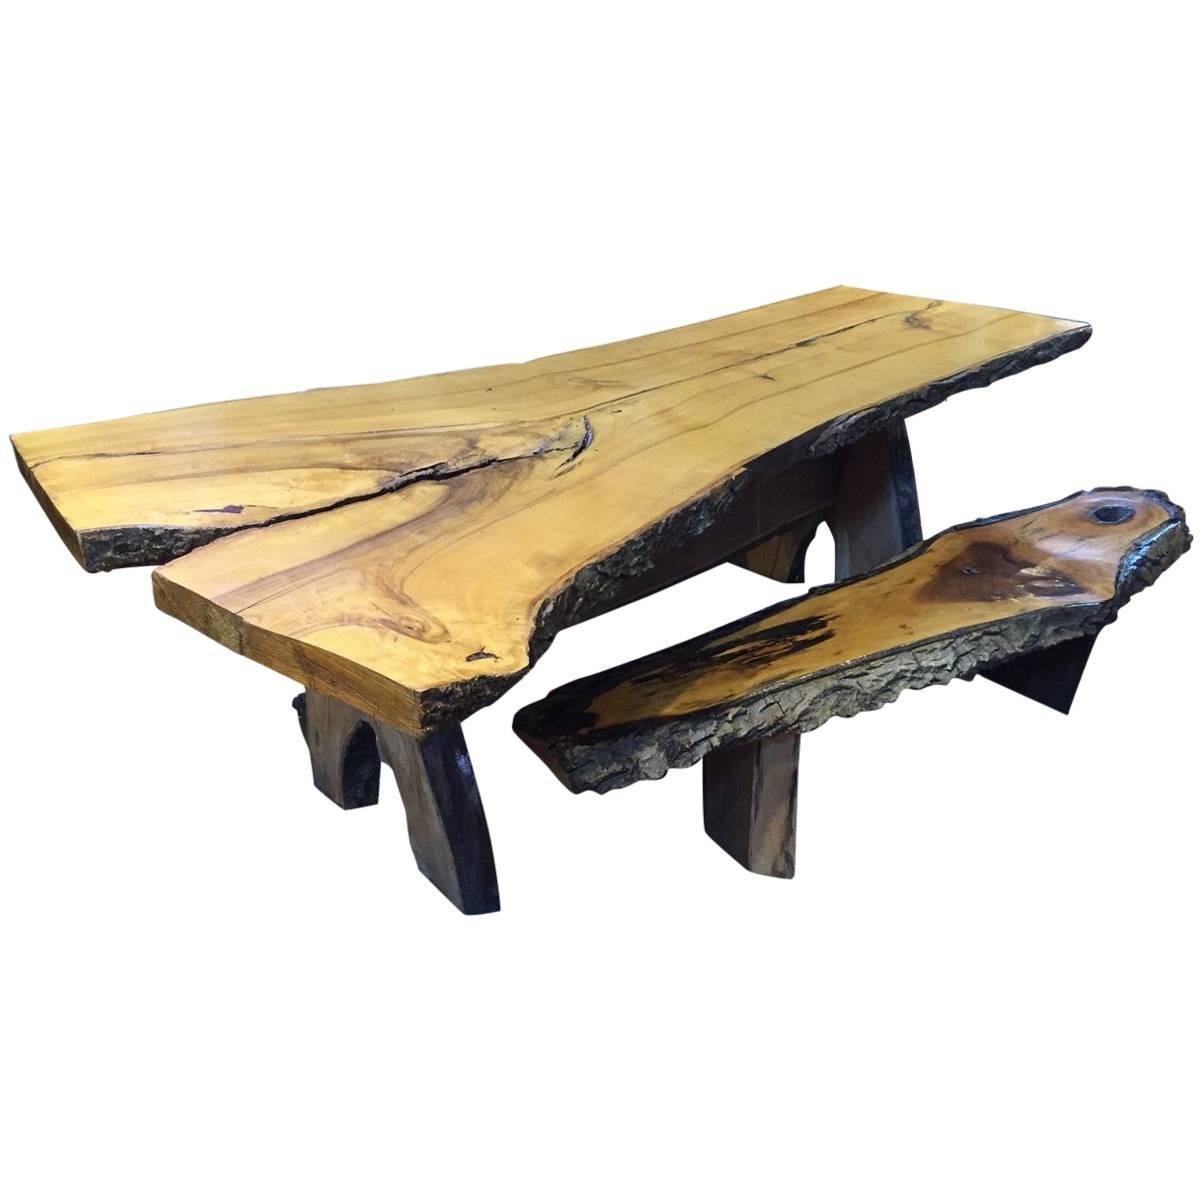 Handmade Live Edge Dining Table and Matching Benches